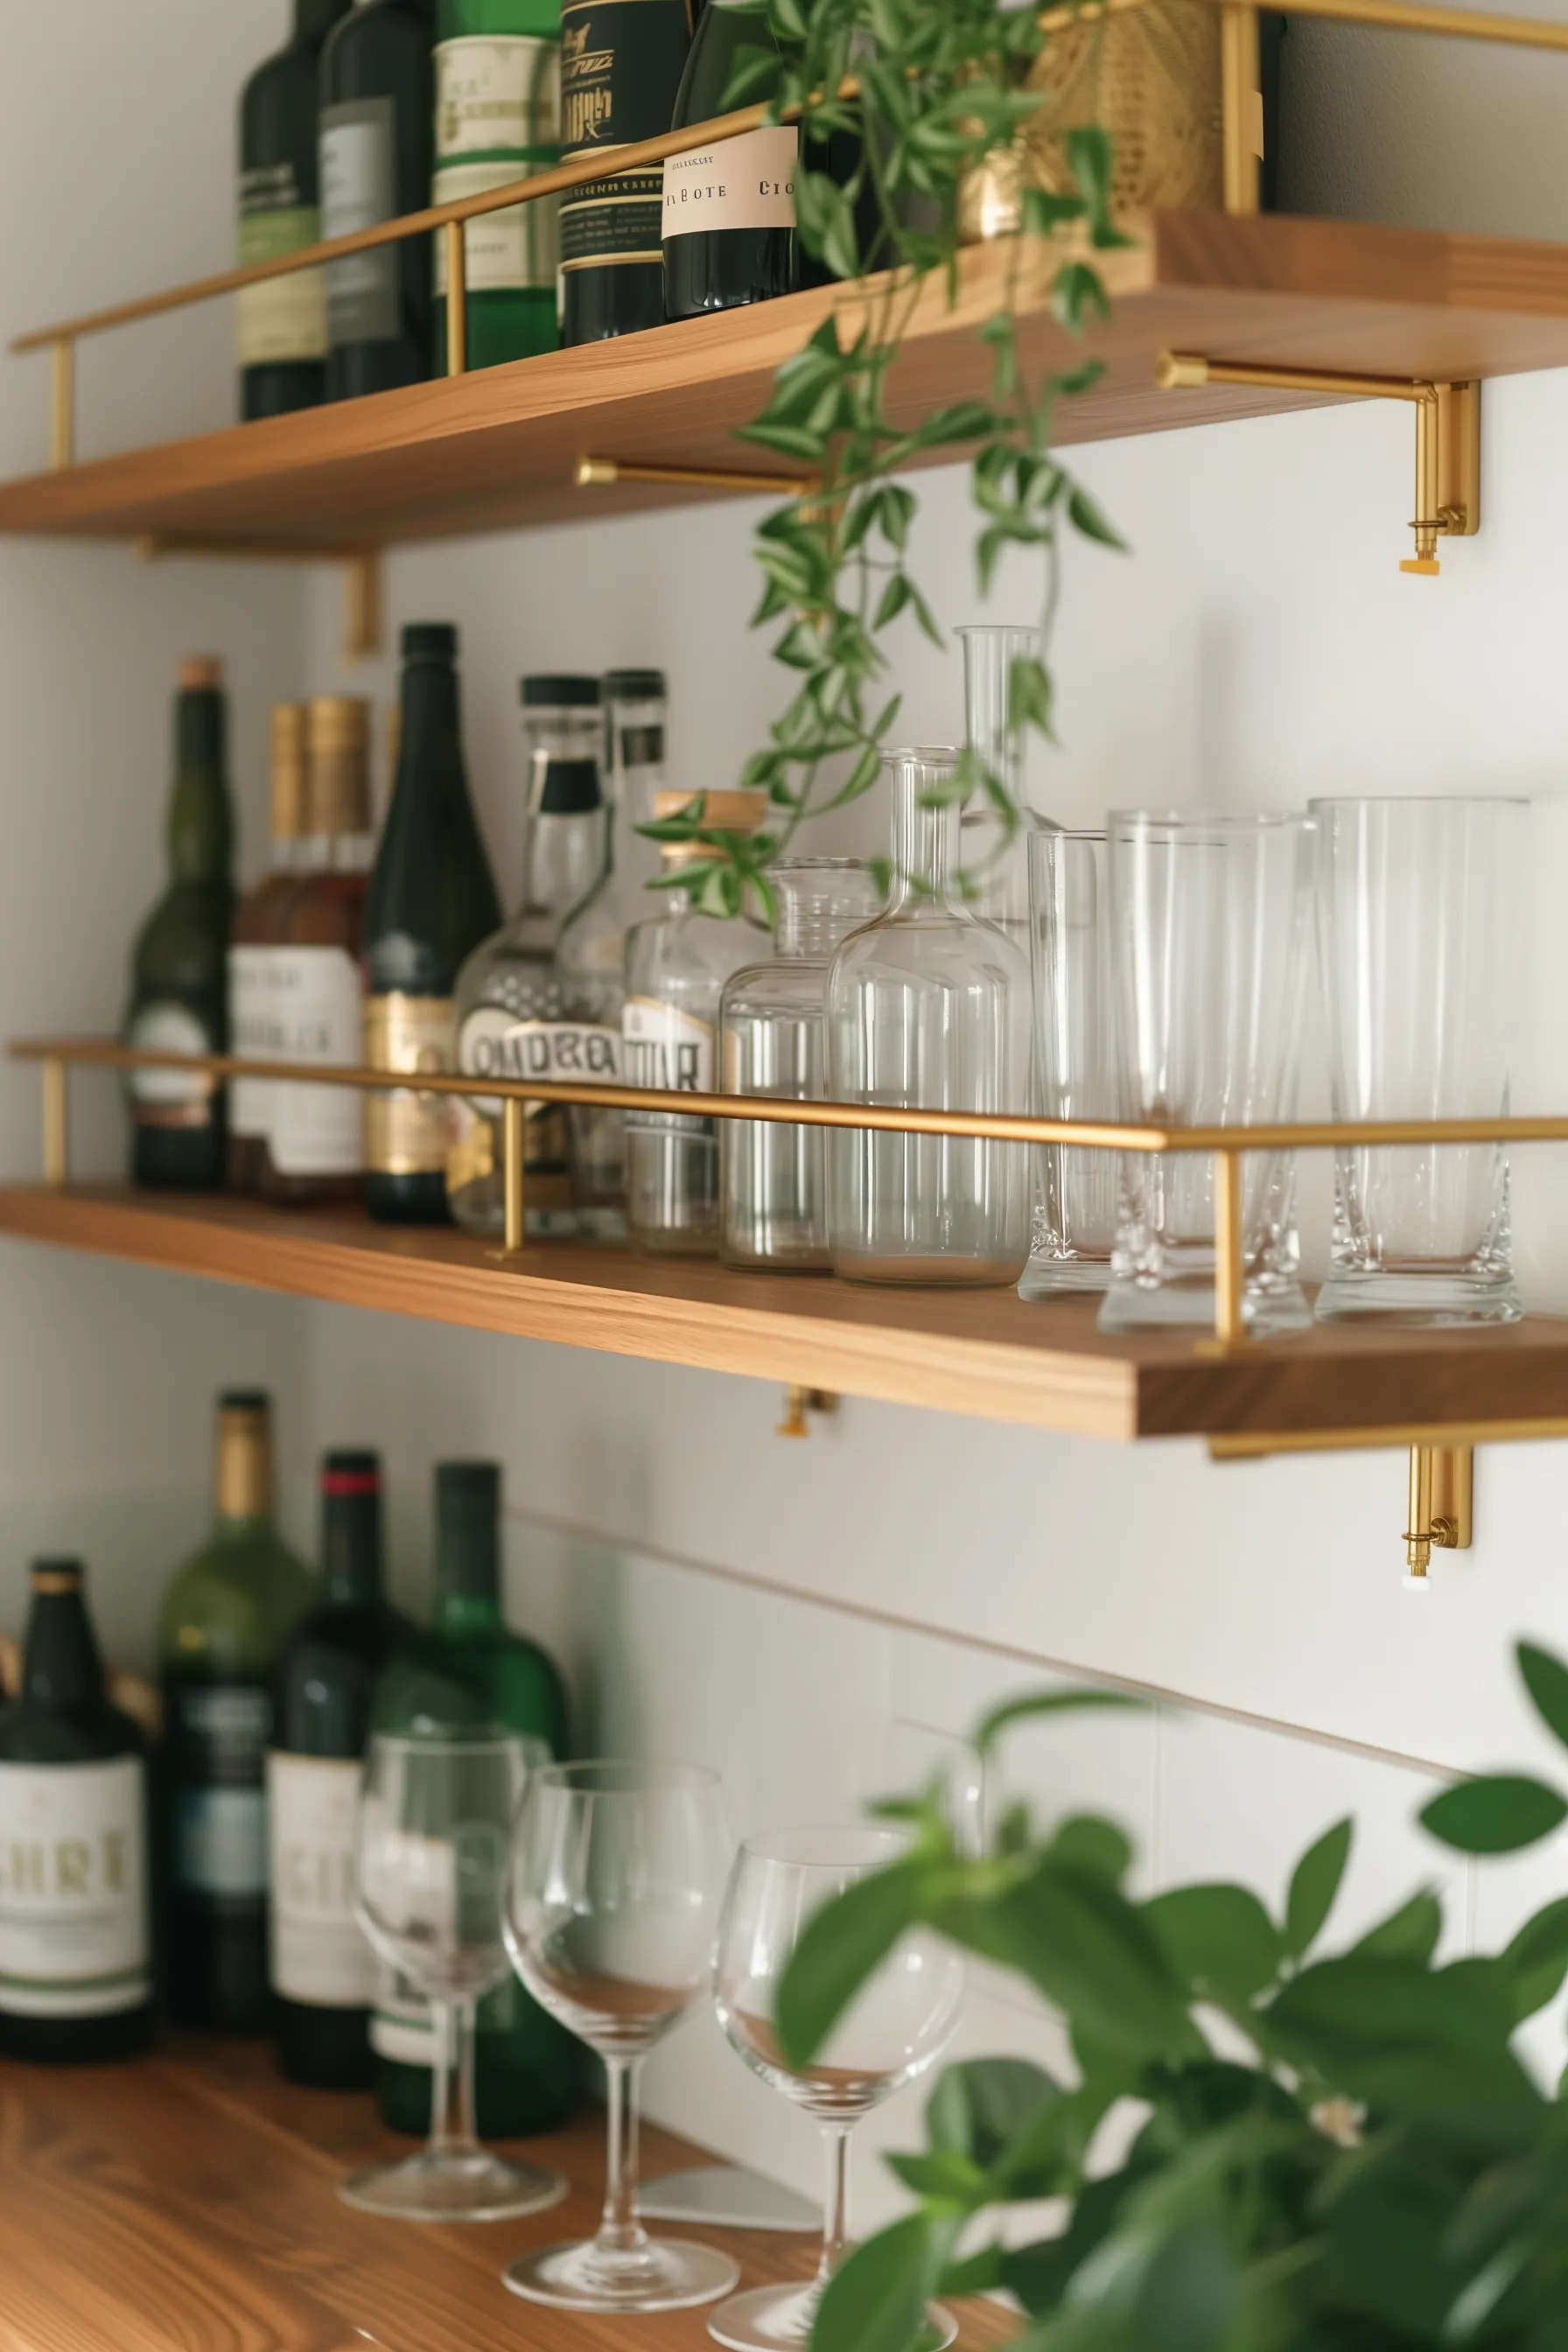 Bar shelves made out of wood and gold accents